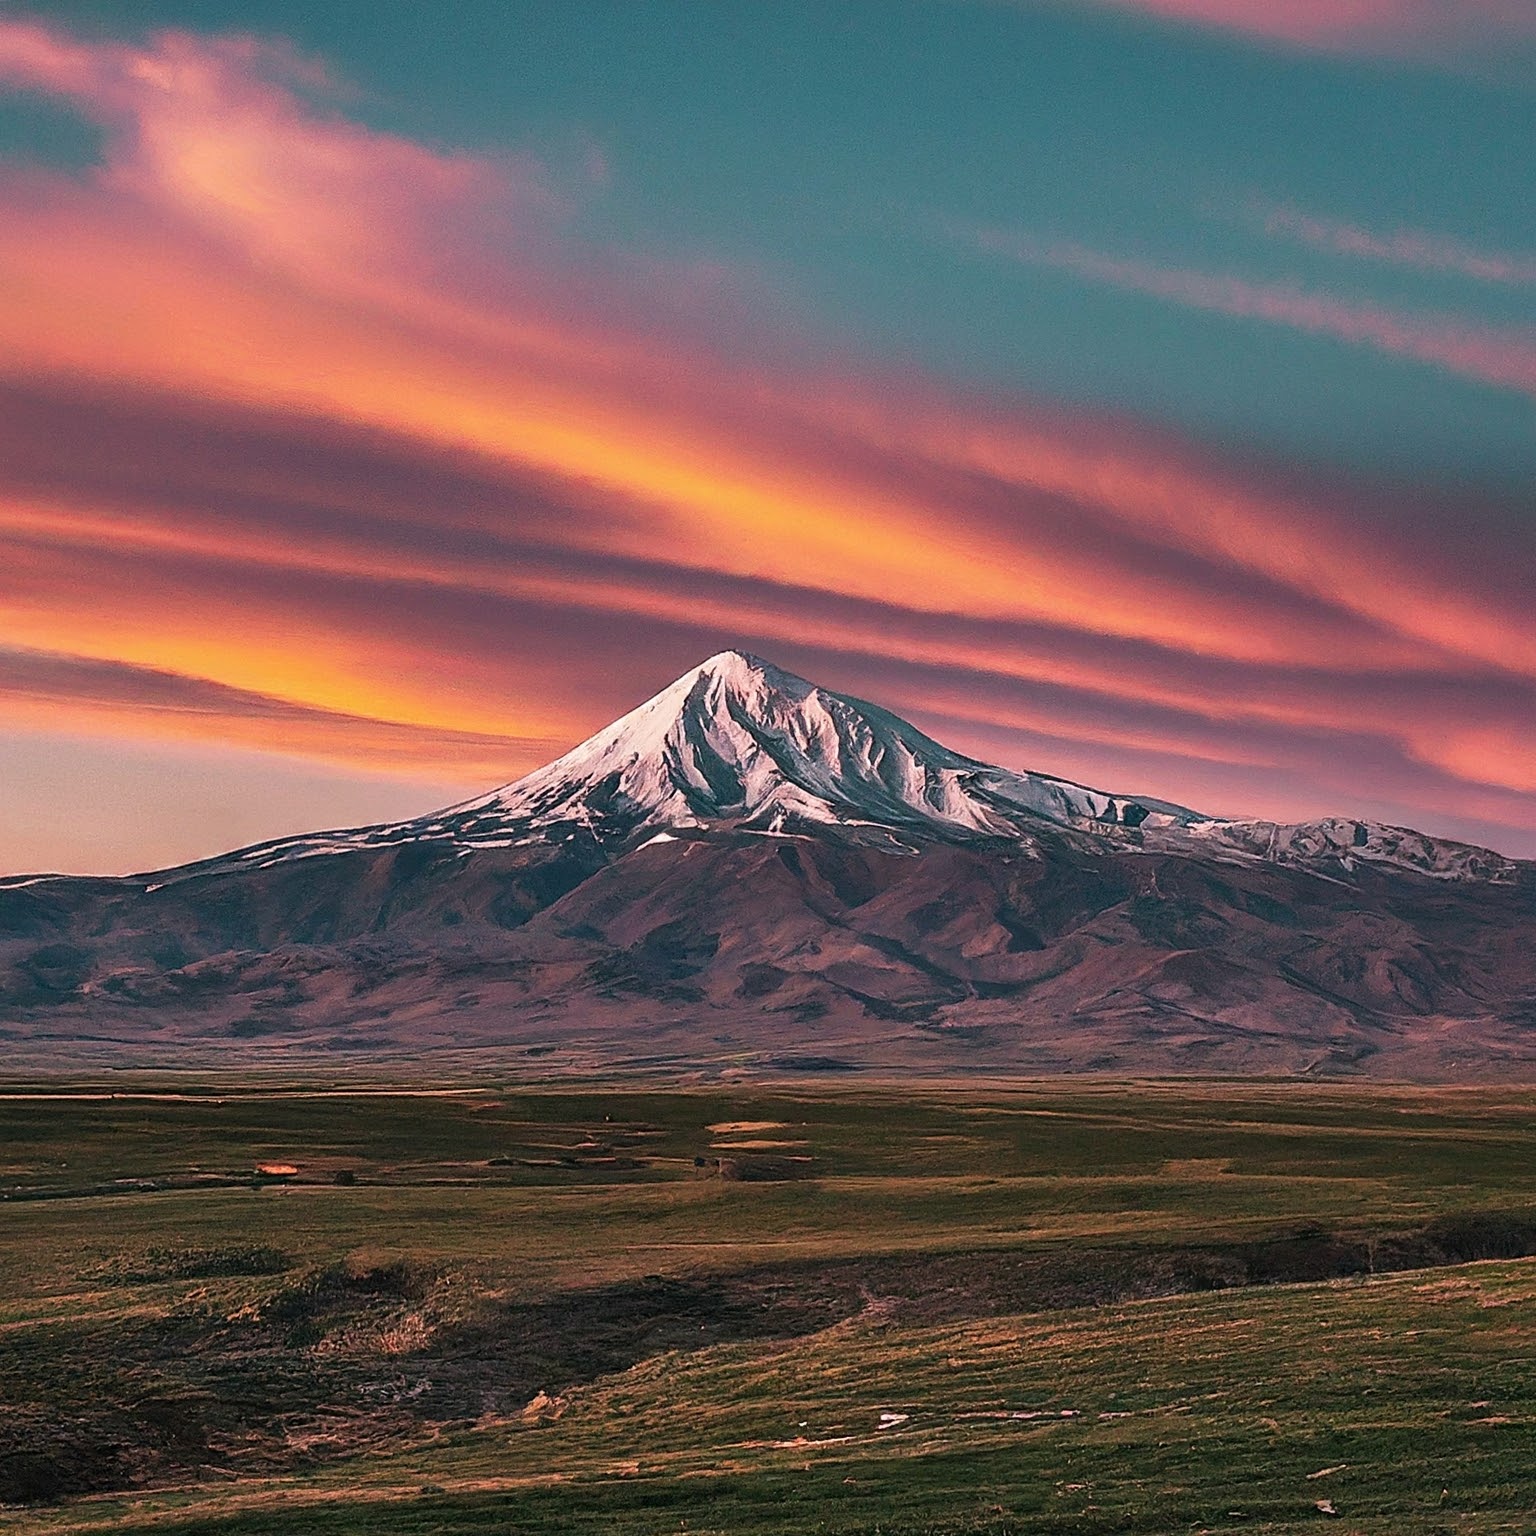 Sunrise over Mount Damavand, Iran, with golden light and colorful clouds.